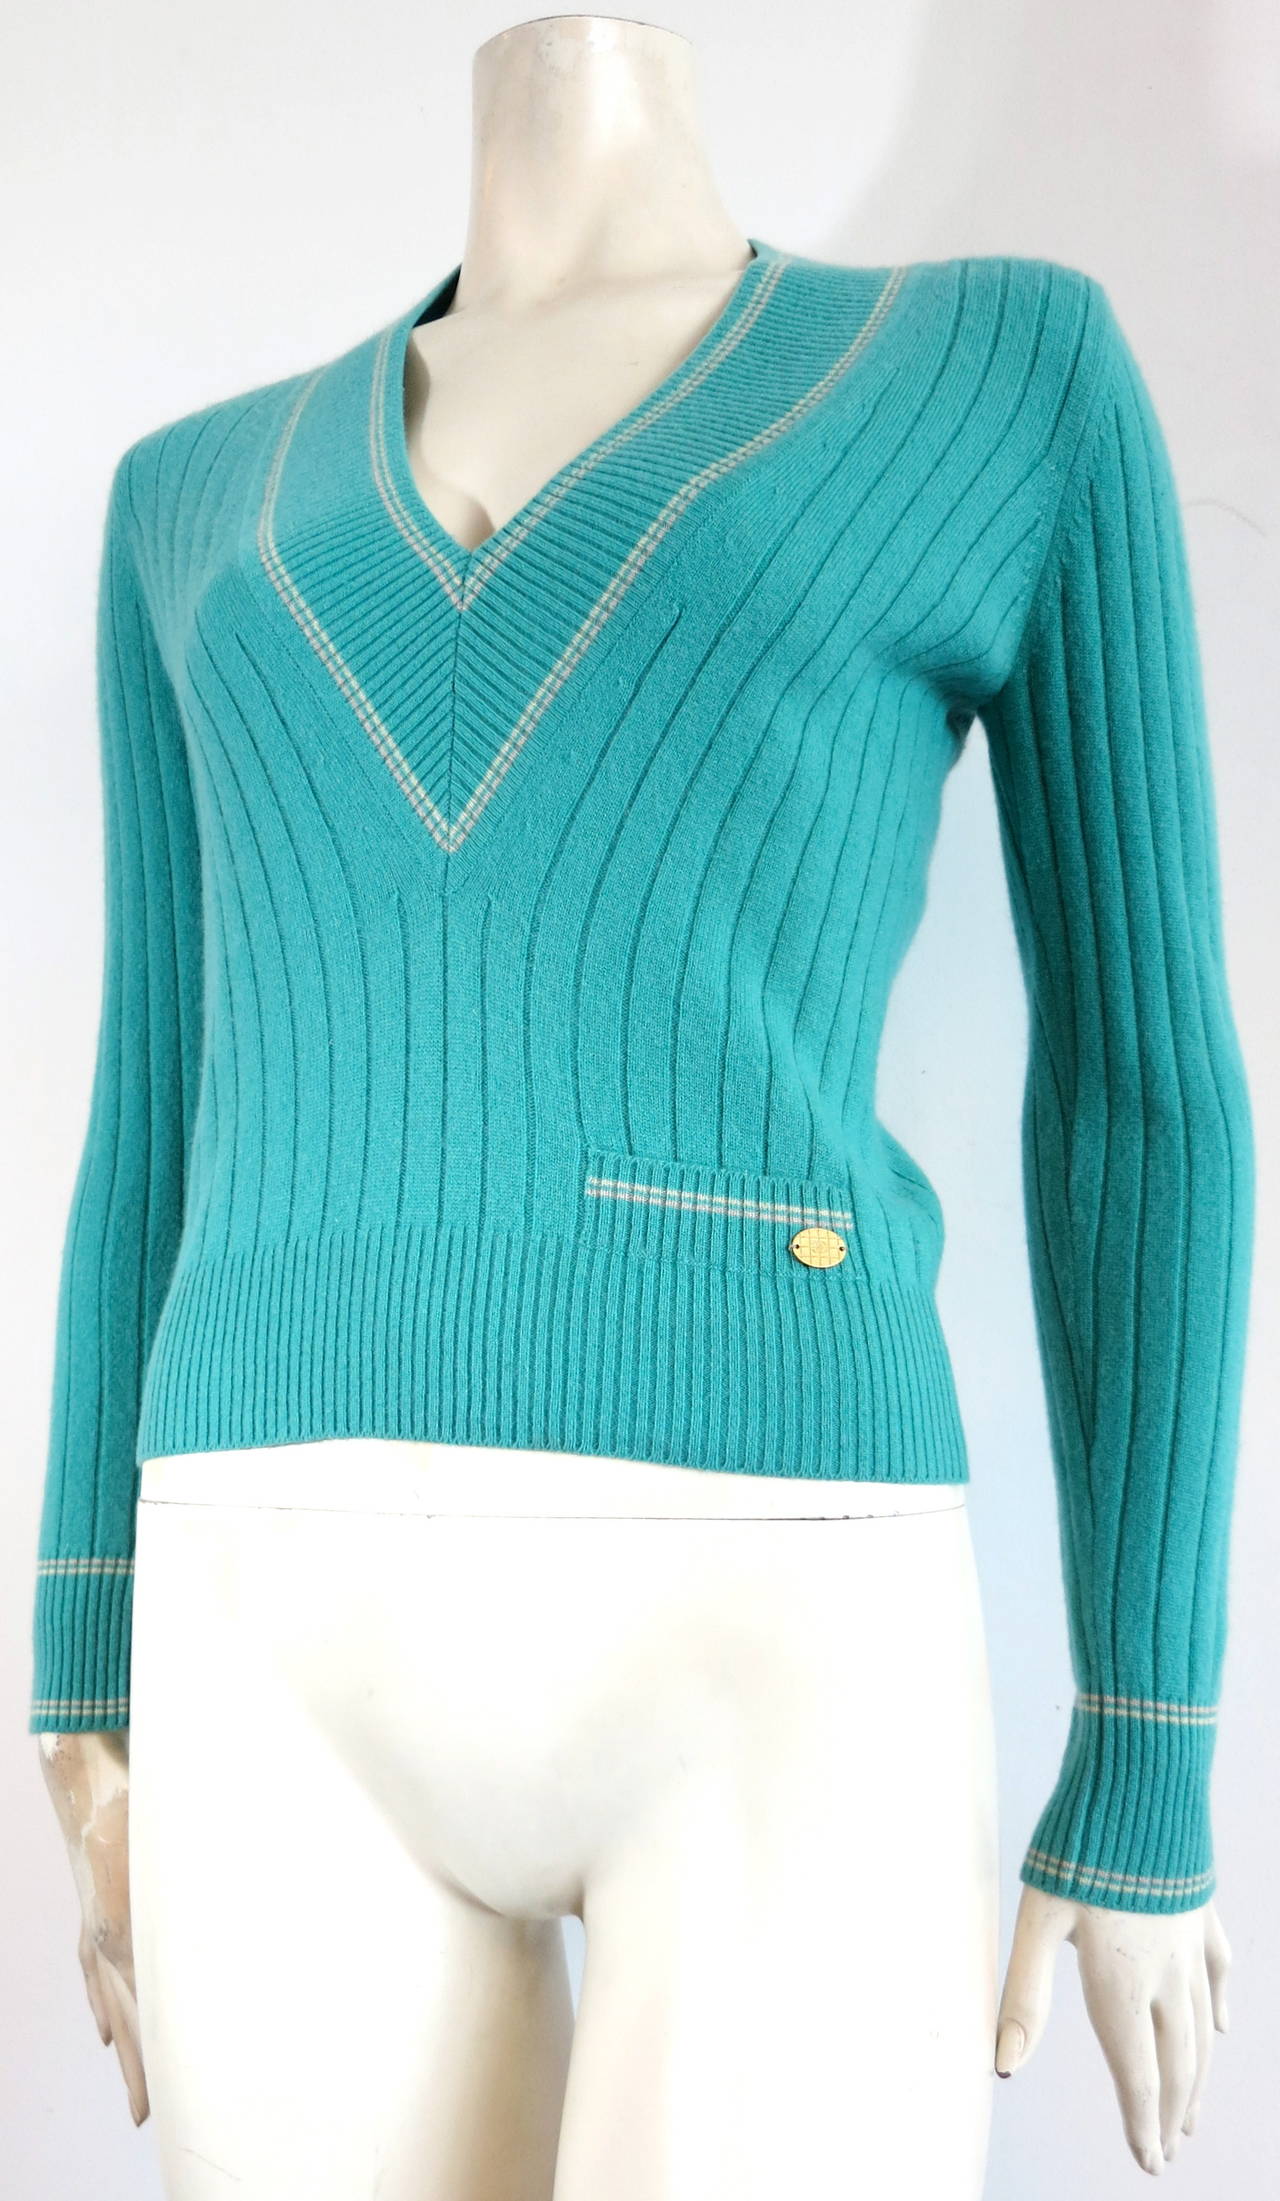 Excellent condition, CHANEL PARIS pure cashmere, 'V'-neck, tennis sweater in refreshing mint green color.

Luxuriously soft hand-feel.  

Small pocket detail opening at wearer's left waist with 'CC' logo engraved oval metal plate.

Striped